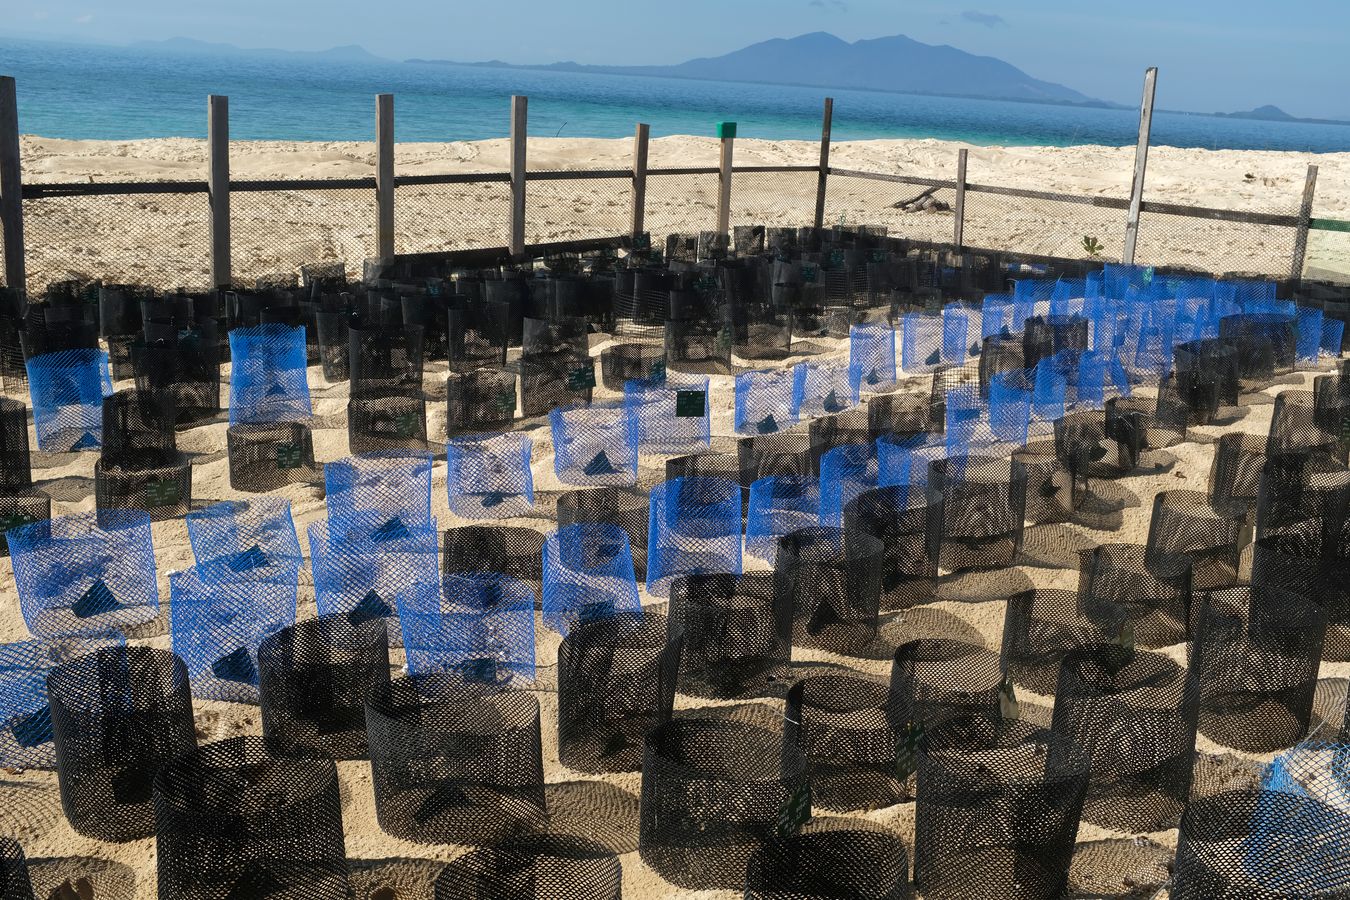 View of the individual sea turtle nests in the hatchery.